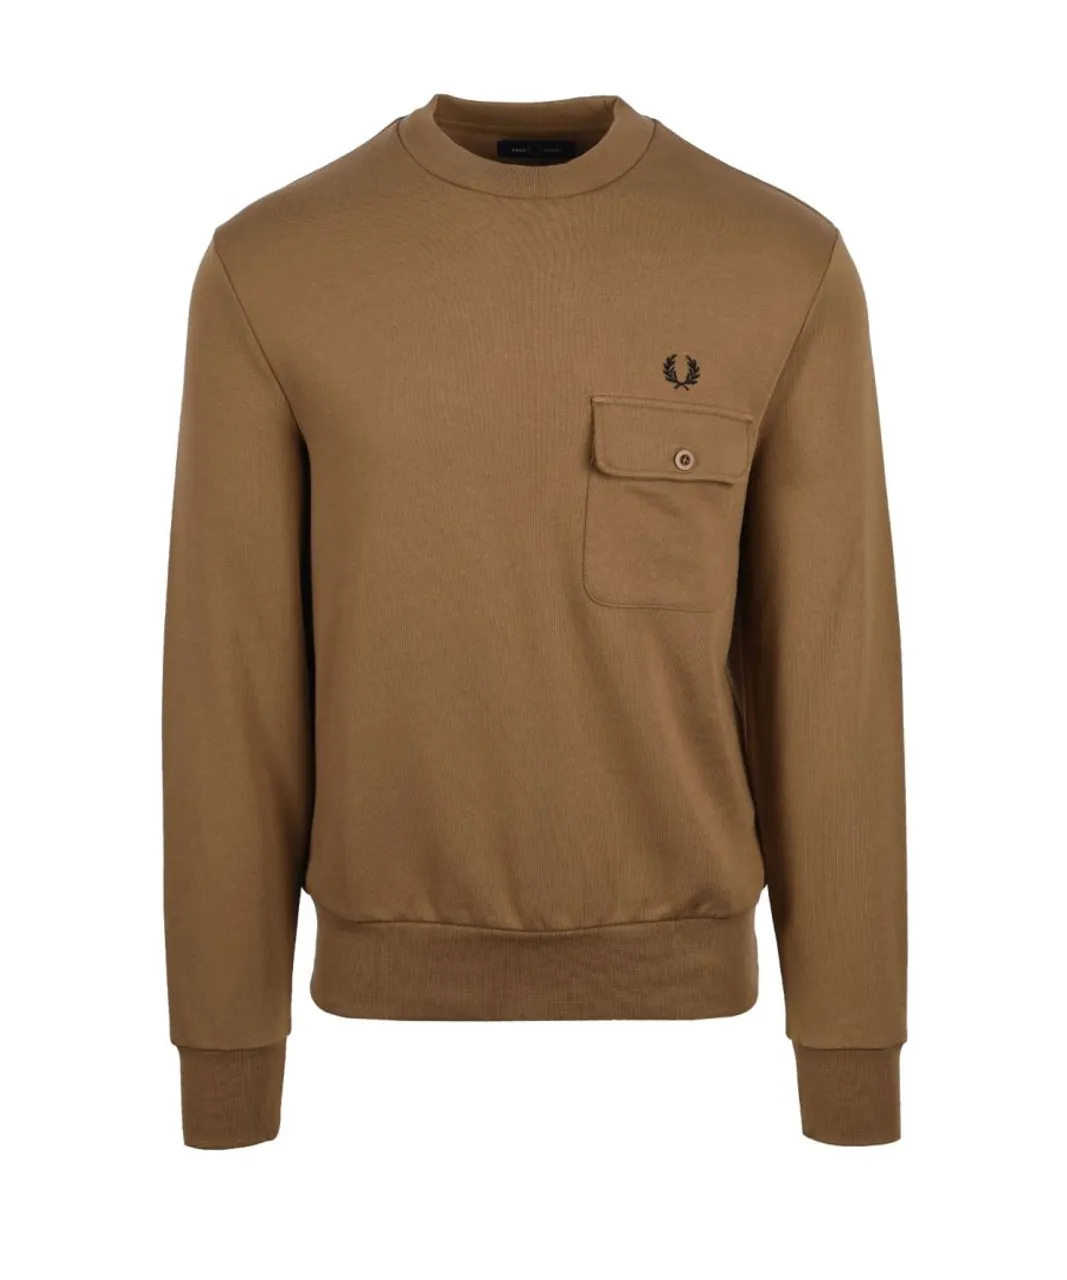 Fred Perry Mens Pocket Detail Crew Neck Sweatshirt Shaded Stone - Brown